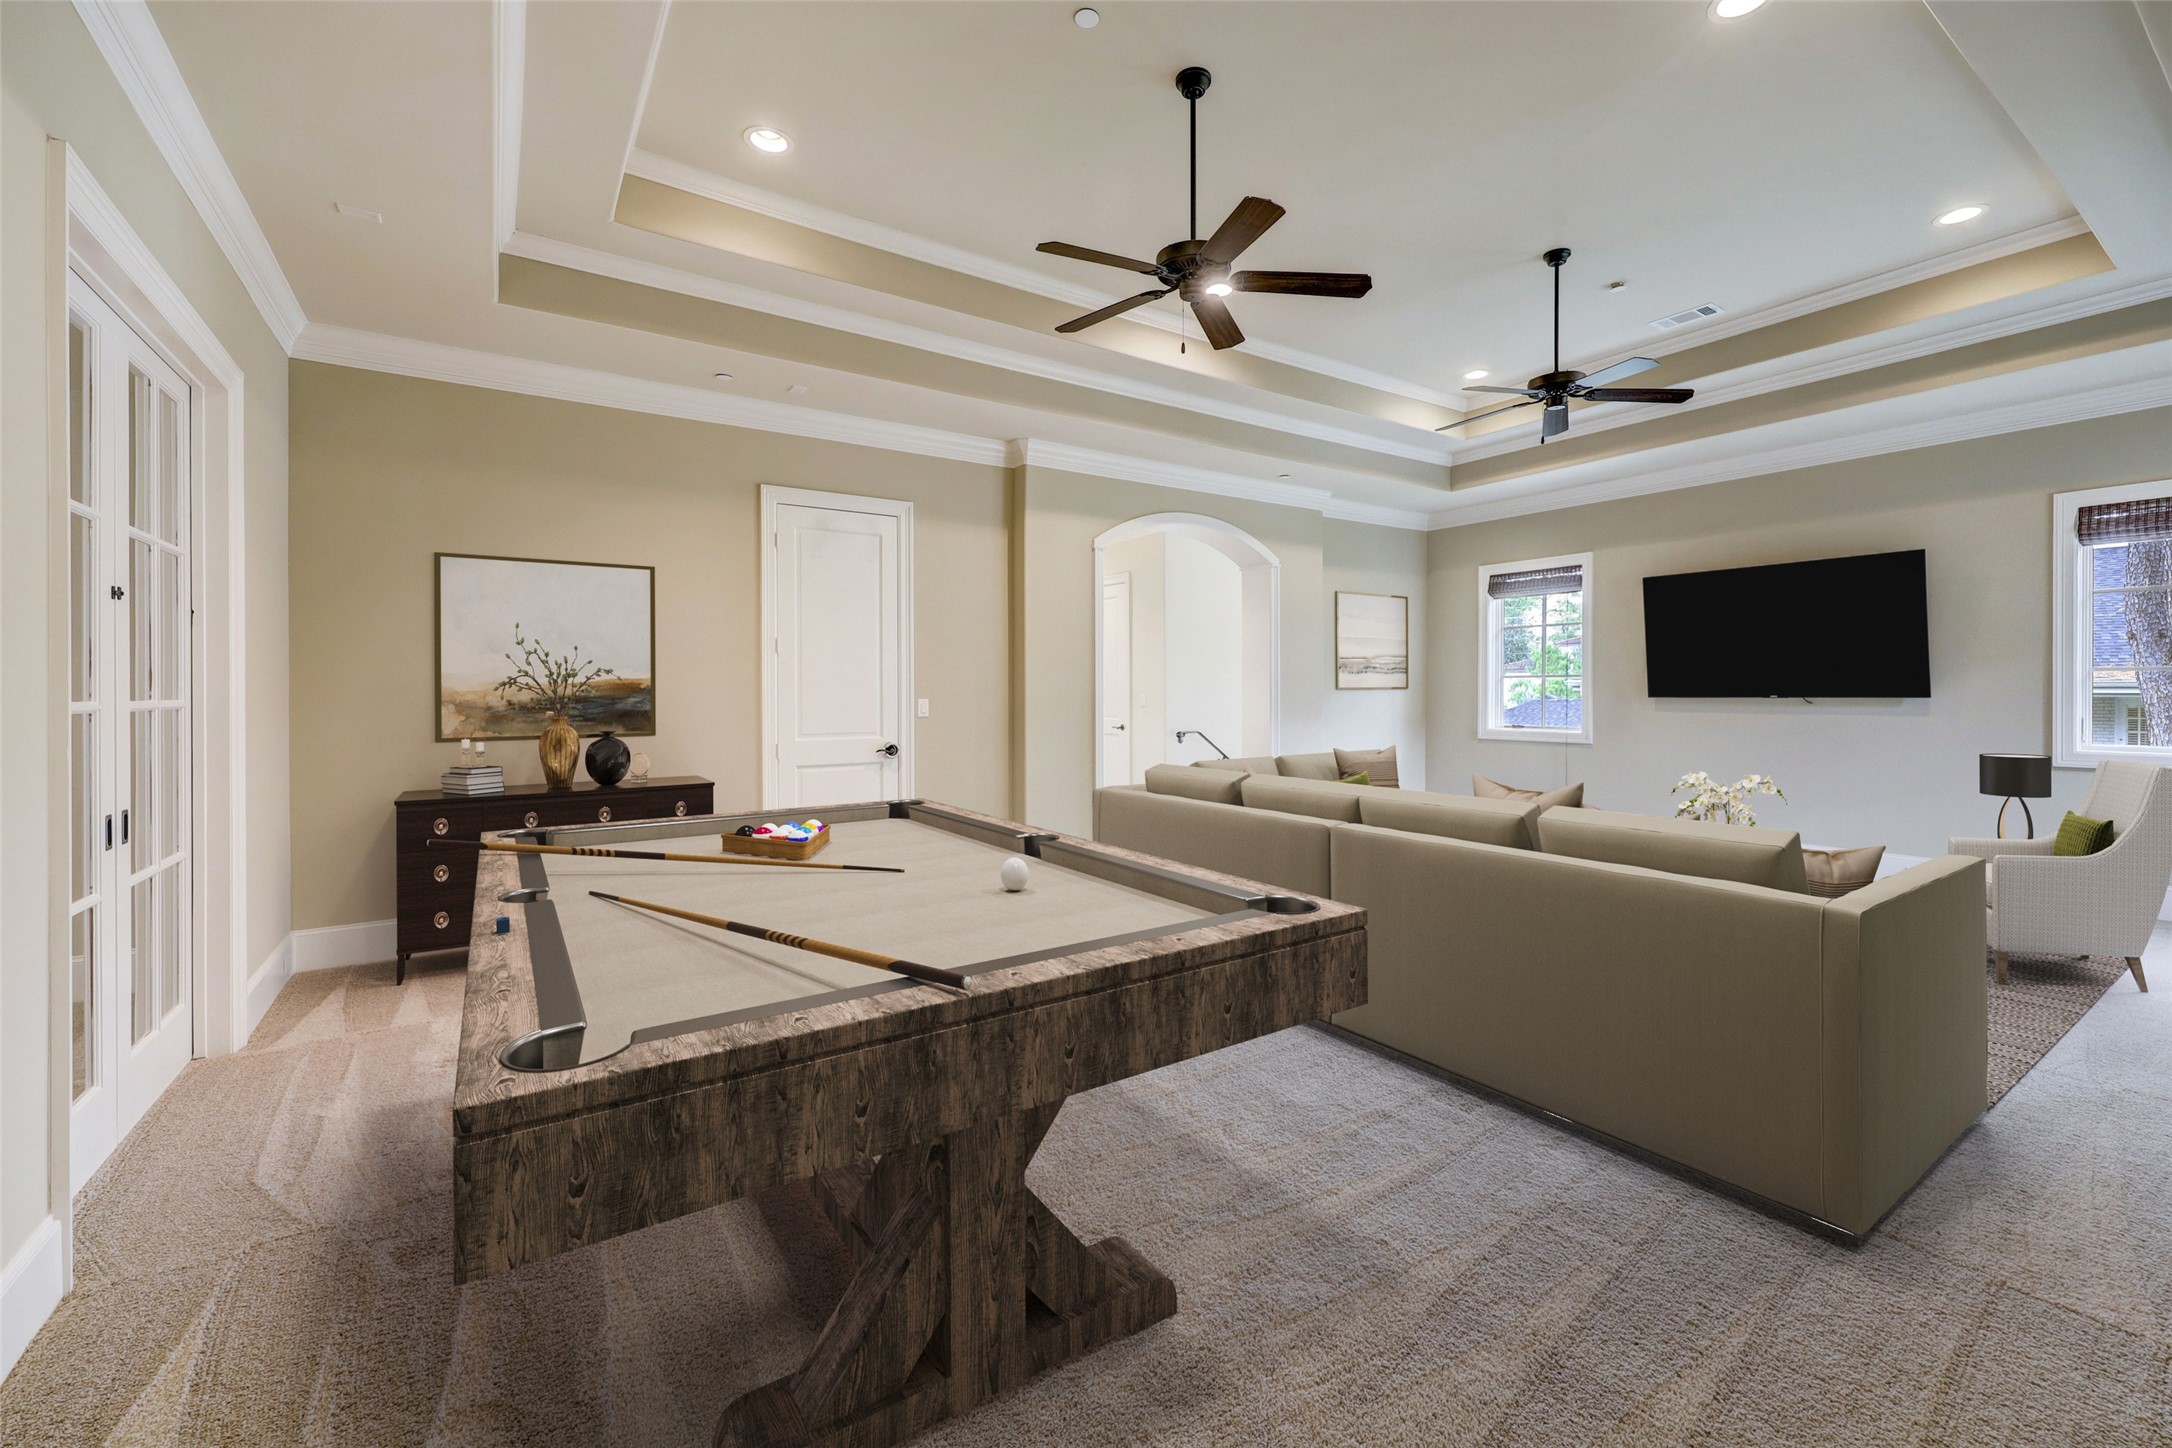 Separate from the Bedroom wing, the Game Room bridges one wing of the home to another.  This room is a great spot for fun and games: From Billiards to Ping Pong to video games or board games.